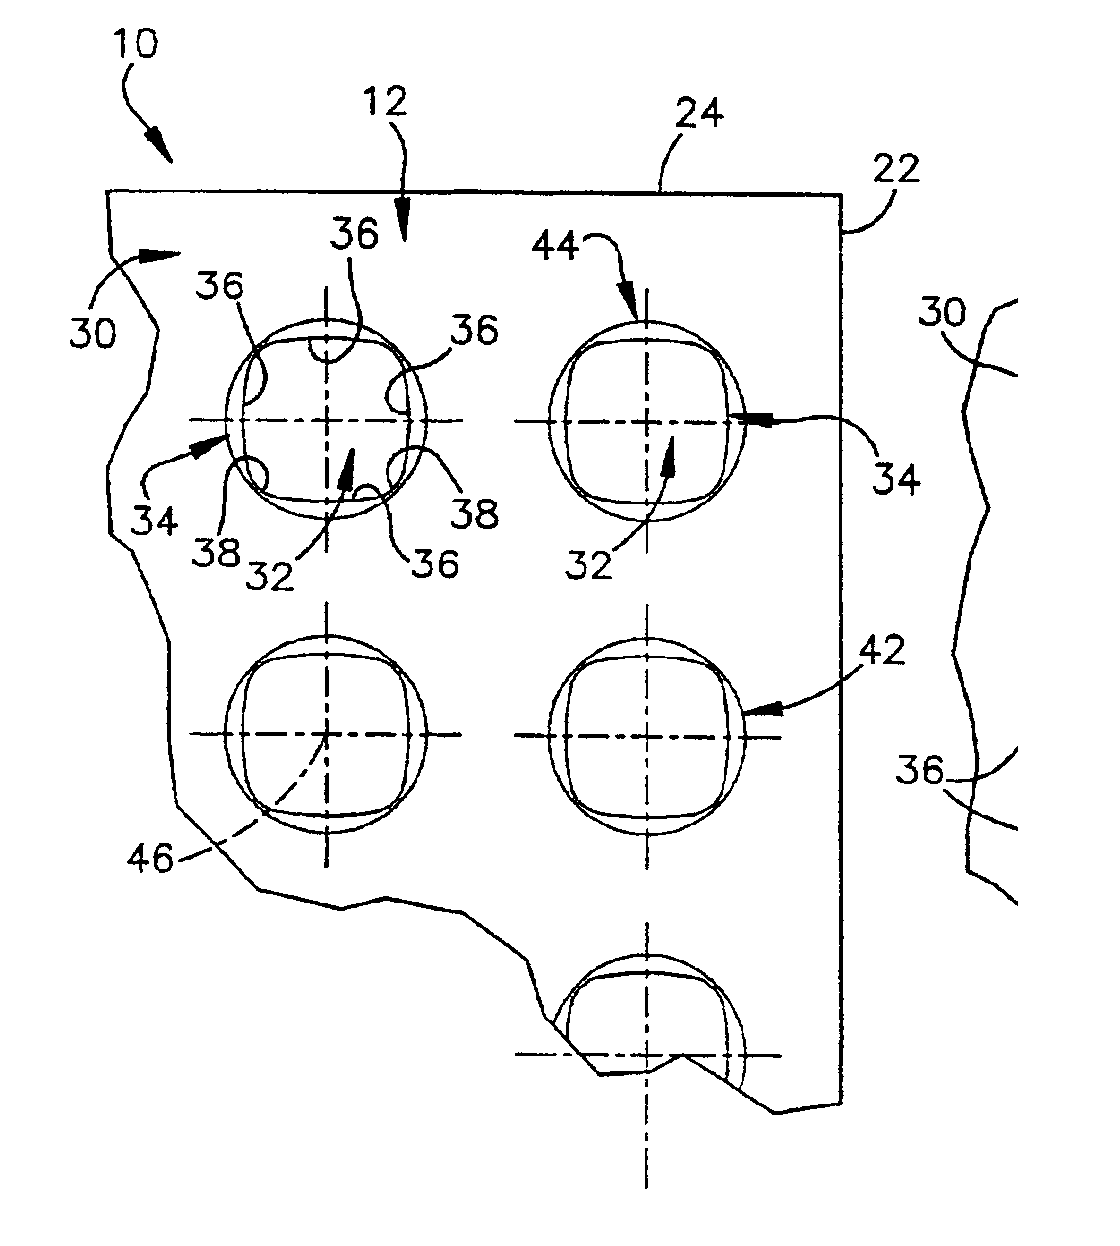 Implantable device for covering and opening in a cranium